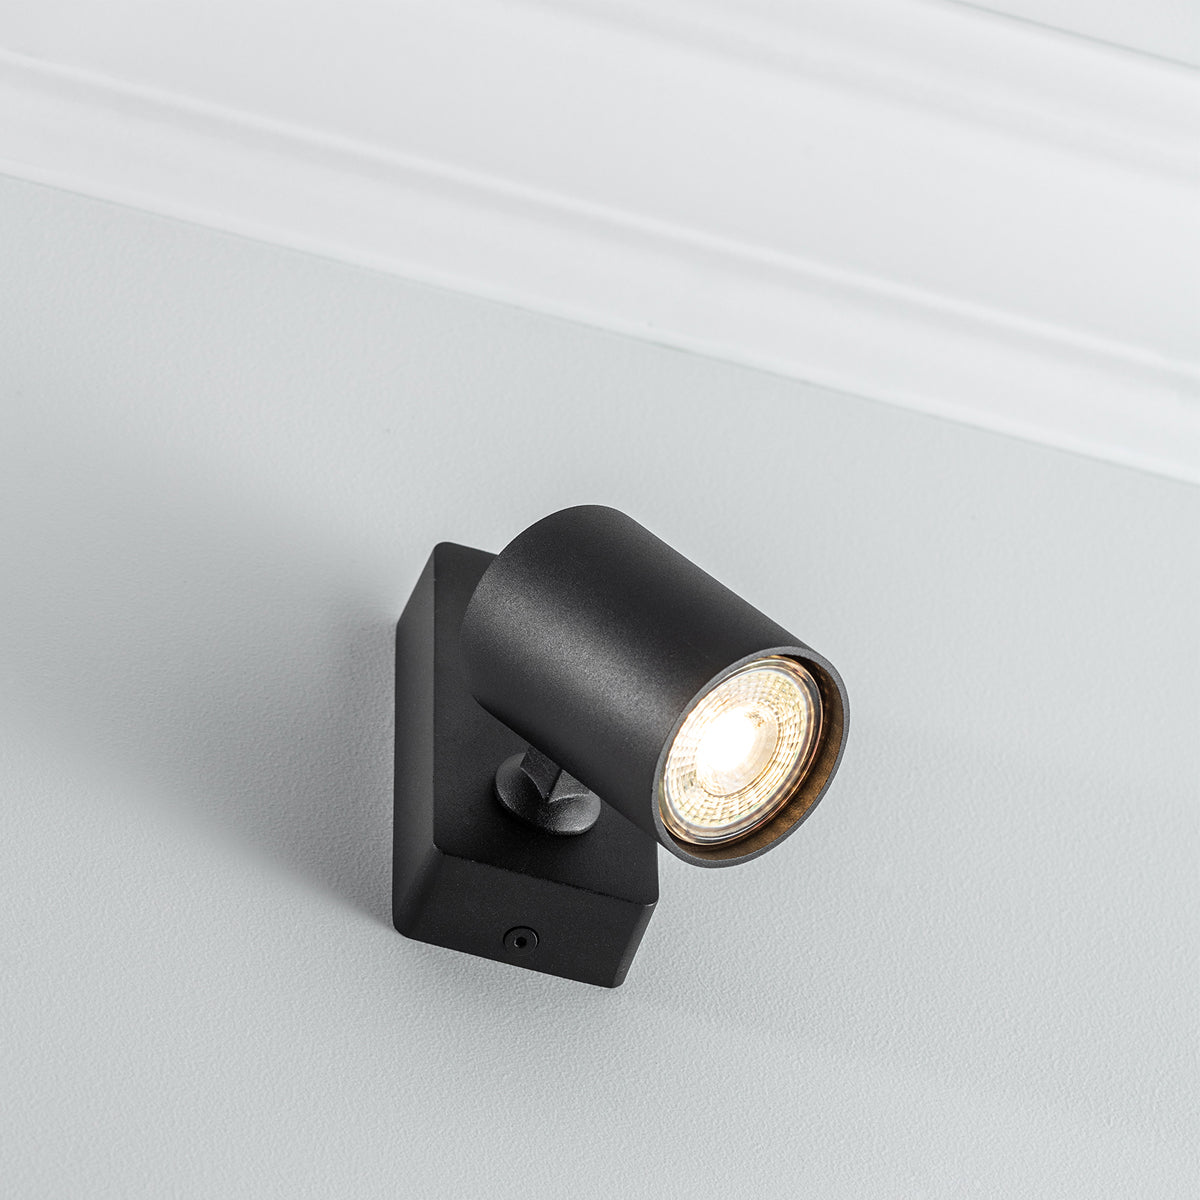 The black Nell lamp consists of a cylindrical spotlight, which can be tilted and adjusted on its own axis. The spotlight is attached to a rectangular bracket, which makes it equally suitable for mounting on walls and ceilings. Made of an aluminium body and powder coated black, the lamp with its simple design fits well into different spaces. Whether functional office or cosy home - the timeless lamp is an perfect for many types of use.